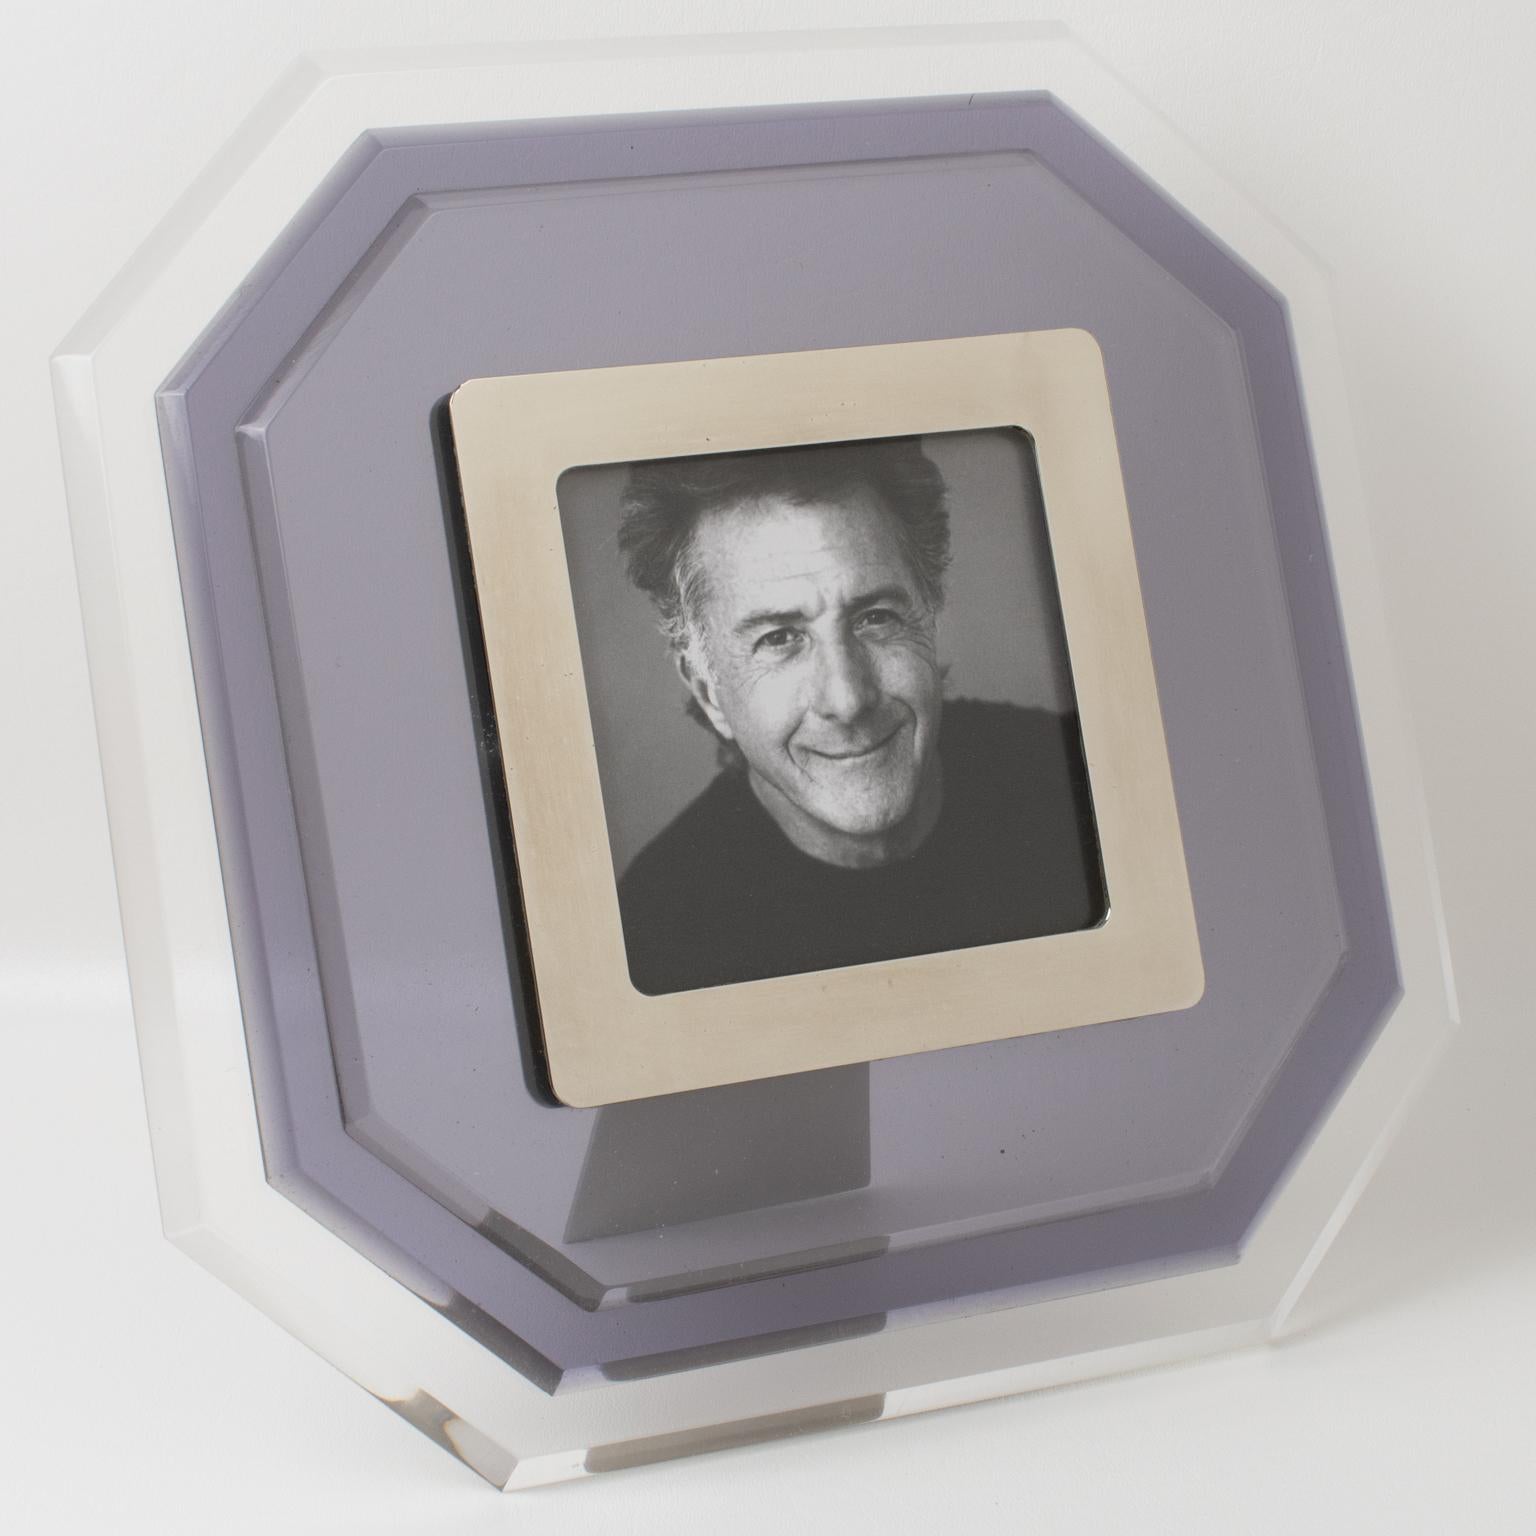 This beautiful and substantial Italian modern Lucite picture photo frame was designed in the 1980s. It features an octagonal shape with multilayers Lucite construction, with transparent color contrasted with a smoke blue-gray tone. The view image is